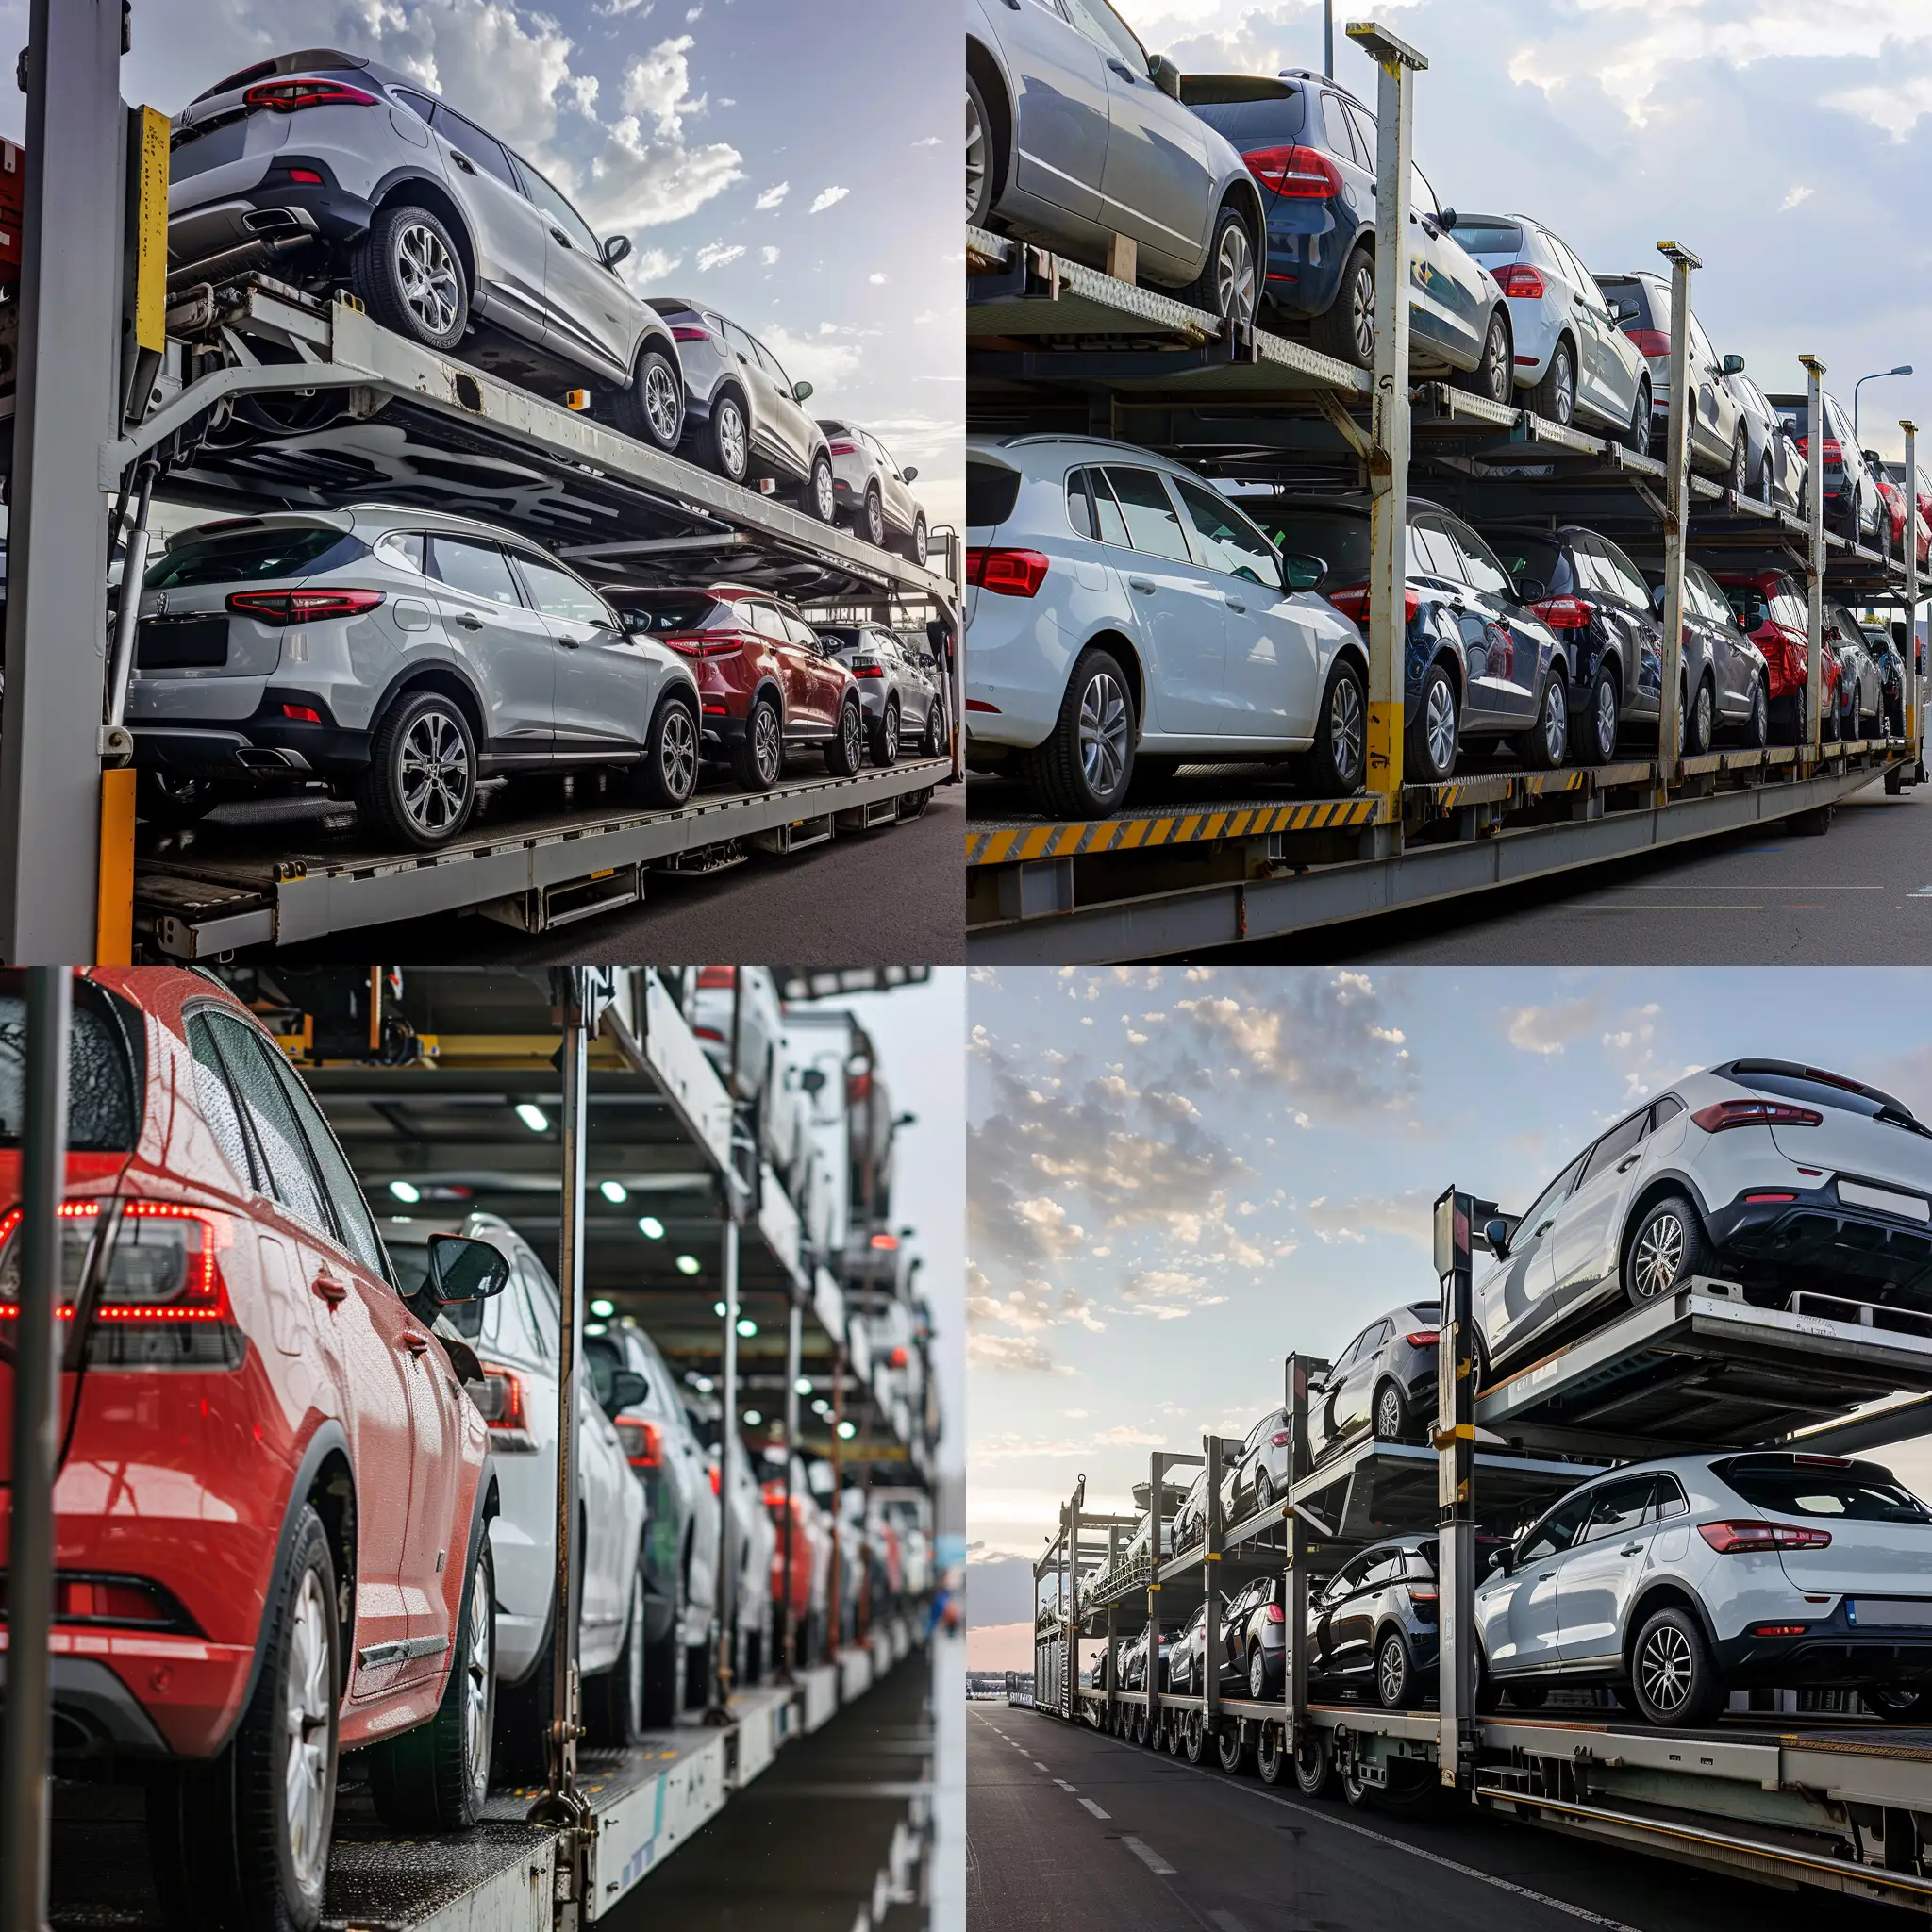 Automobiles loaded in a car carrier